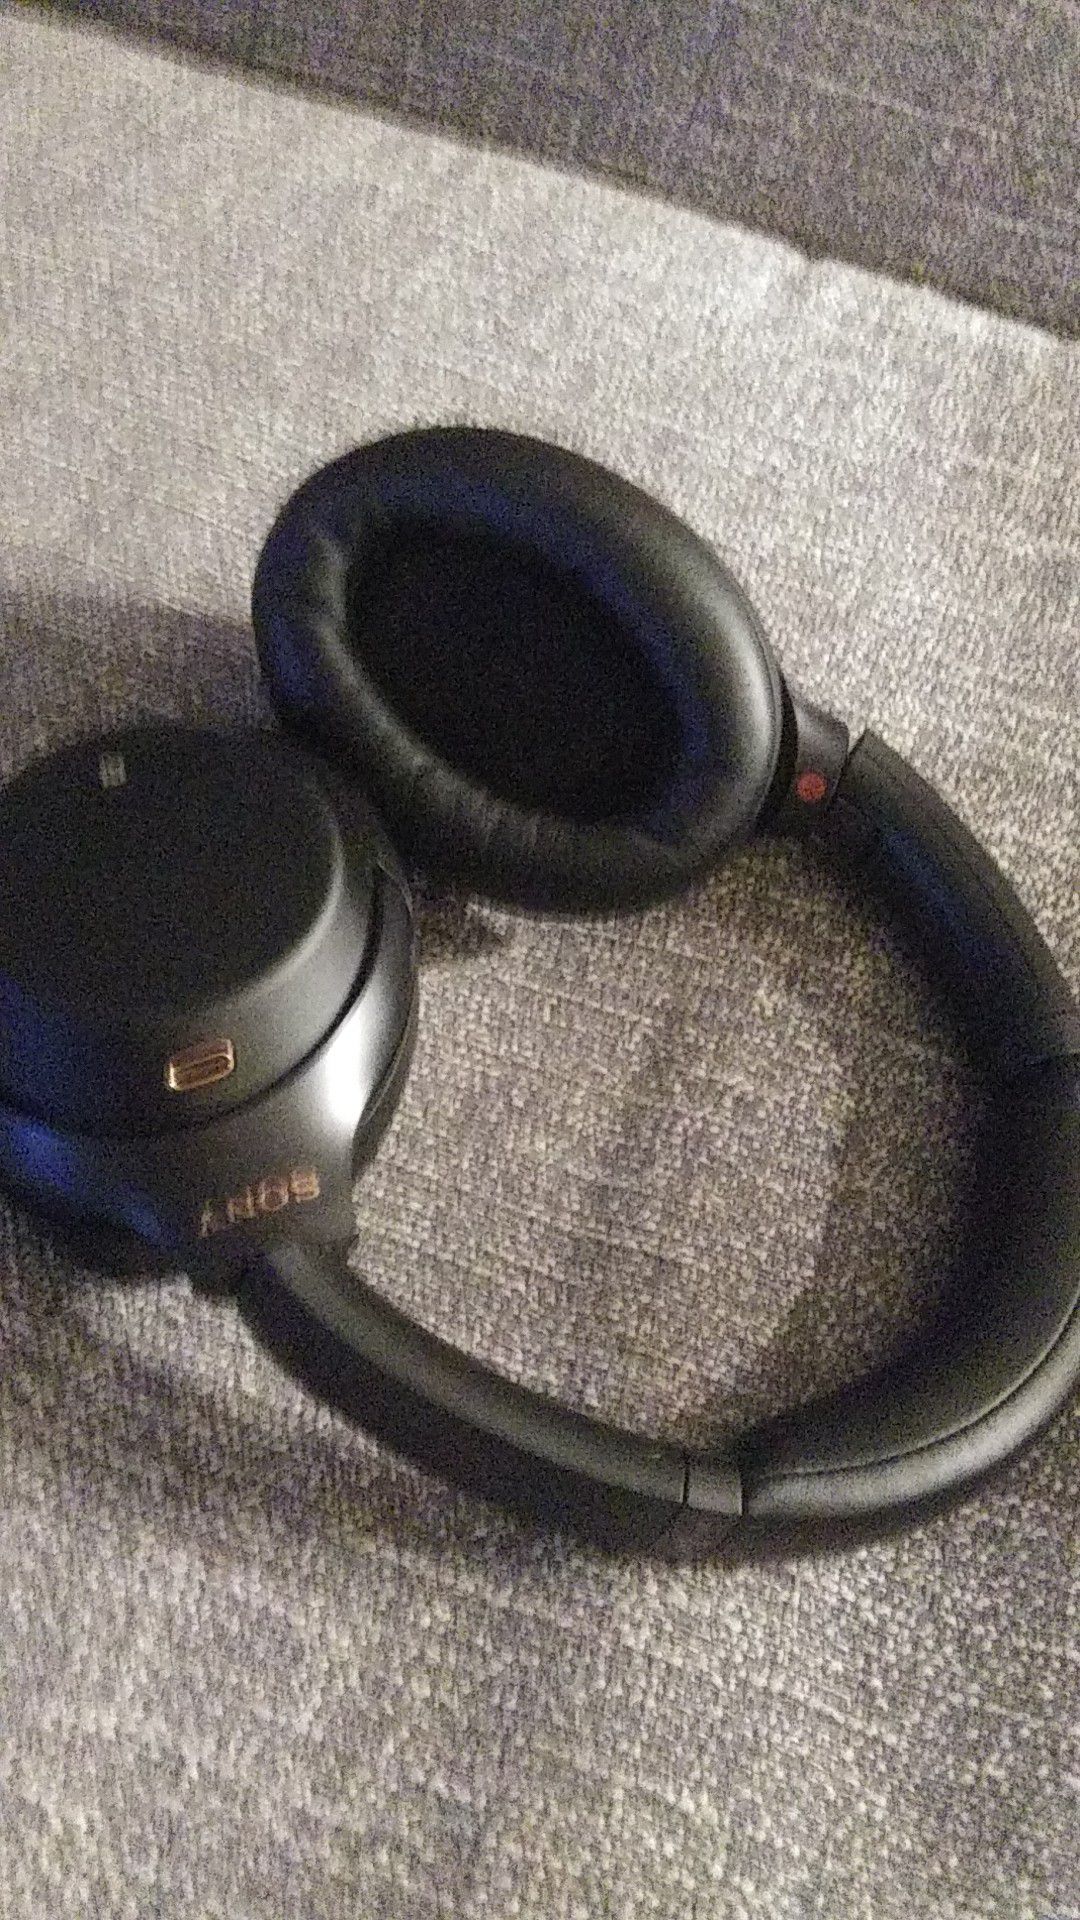 Sony noise cancelling headphones. WH-1000X M3